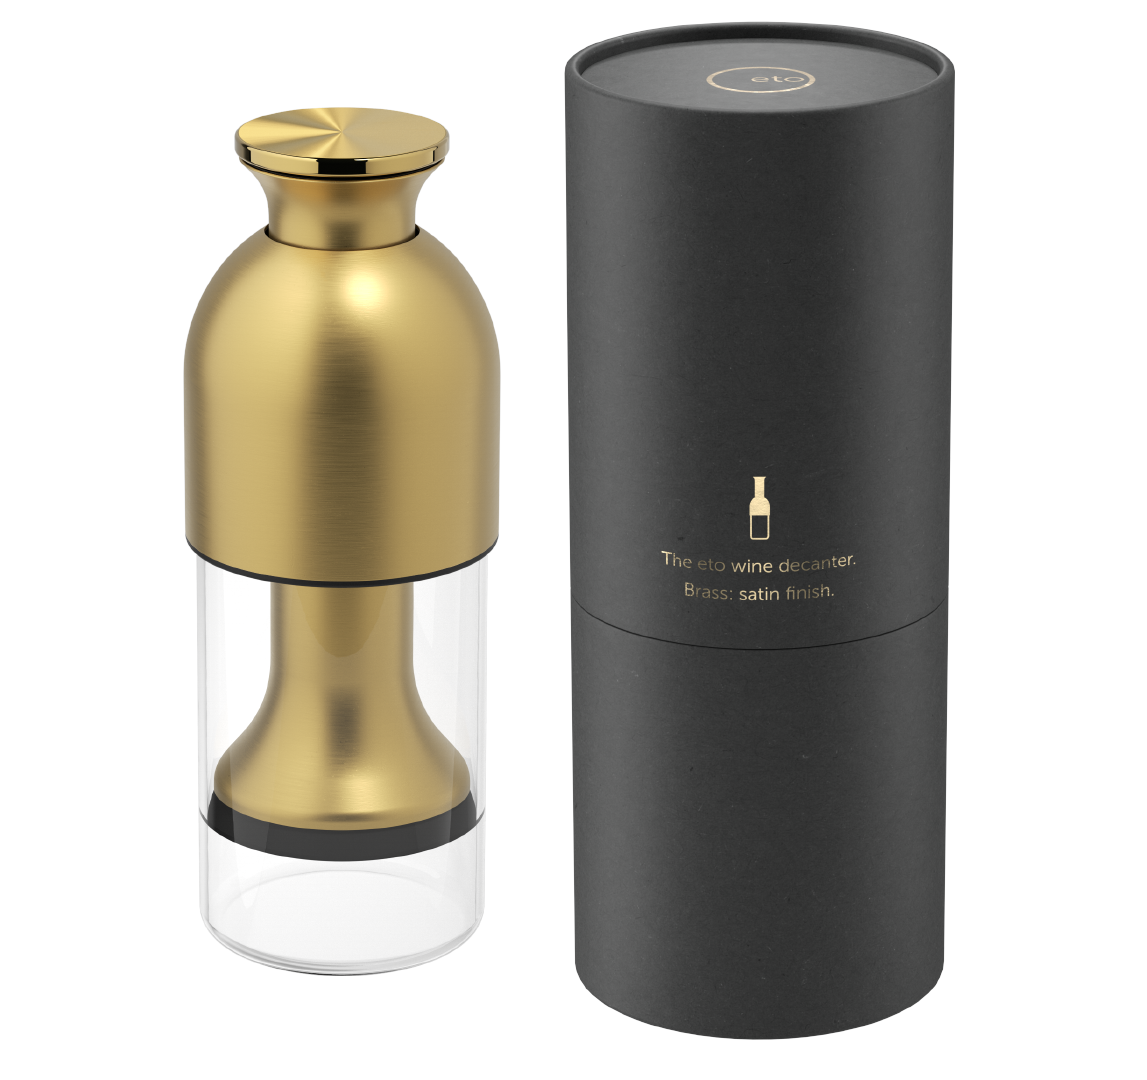 Limited edition eto wine preservation decanter in brass satin finish with black tube presentation pack